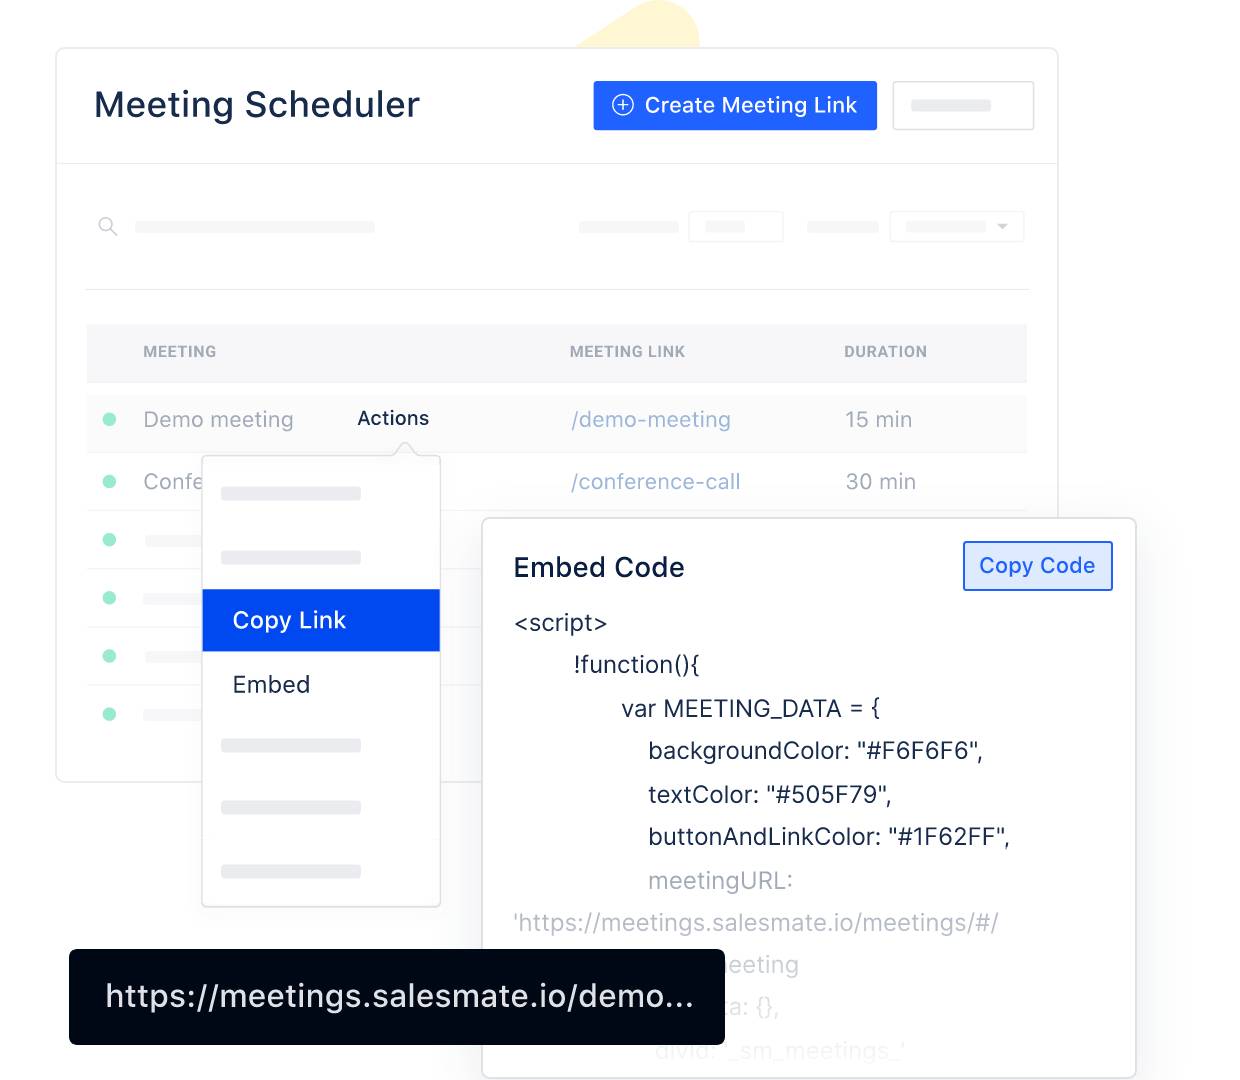 Stay productive with easy meeting scheduler